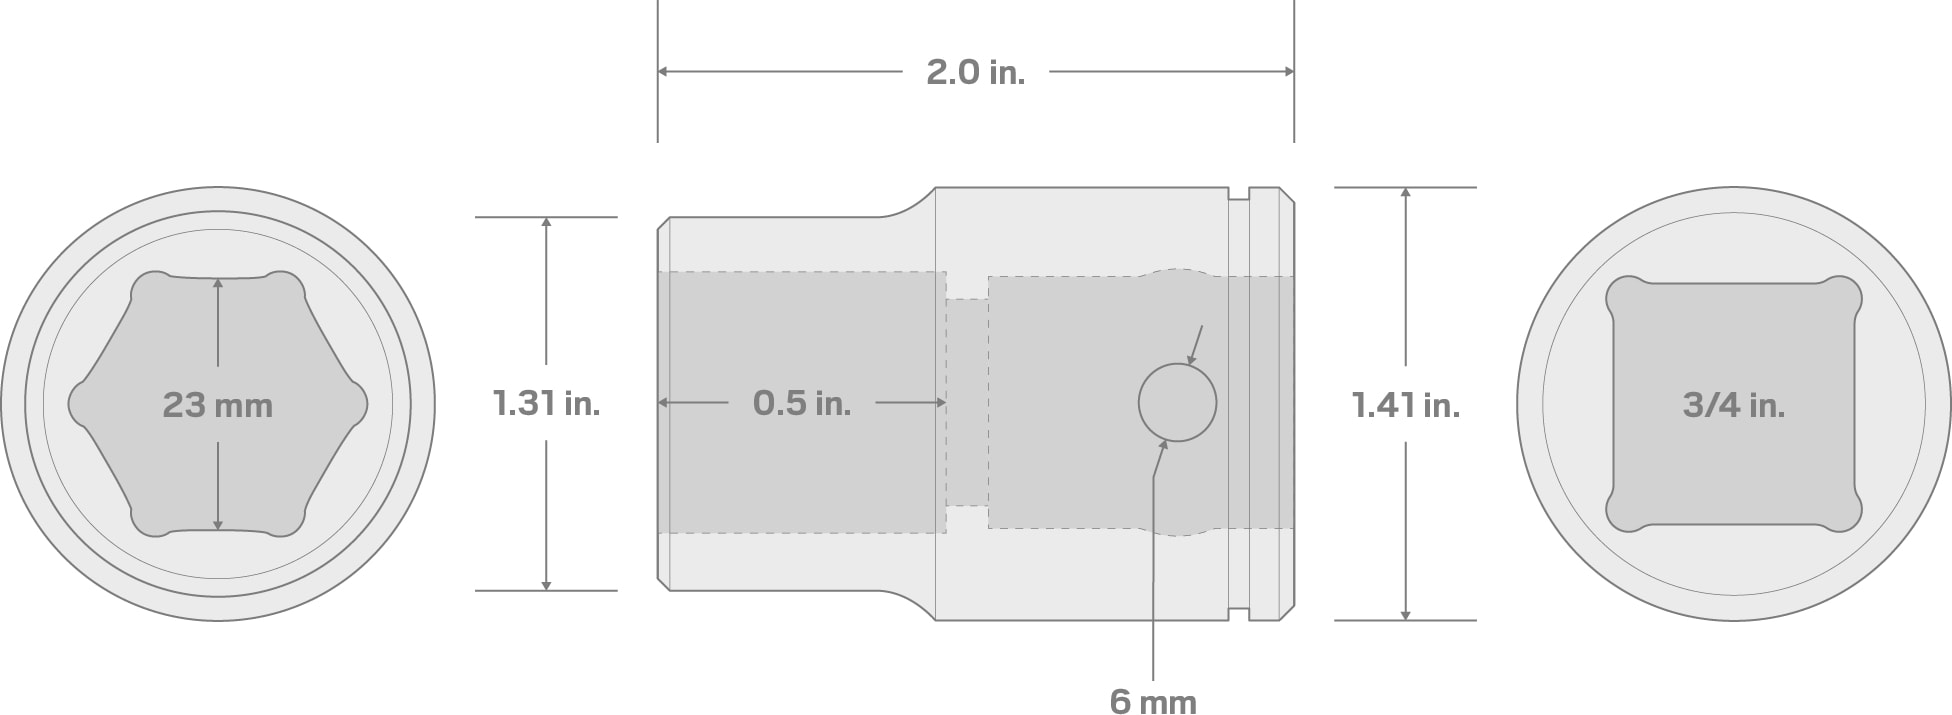 Specs for 3/4 Inch Drive x 23 mm 6-Point Socket